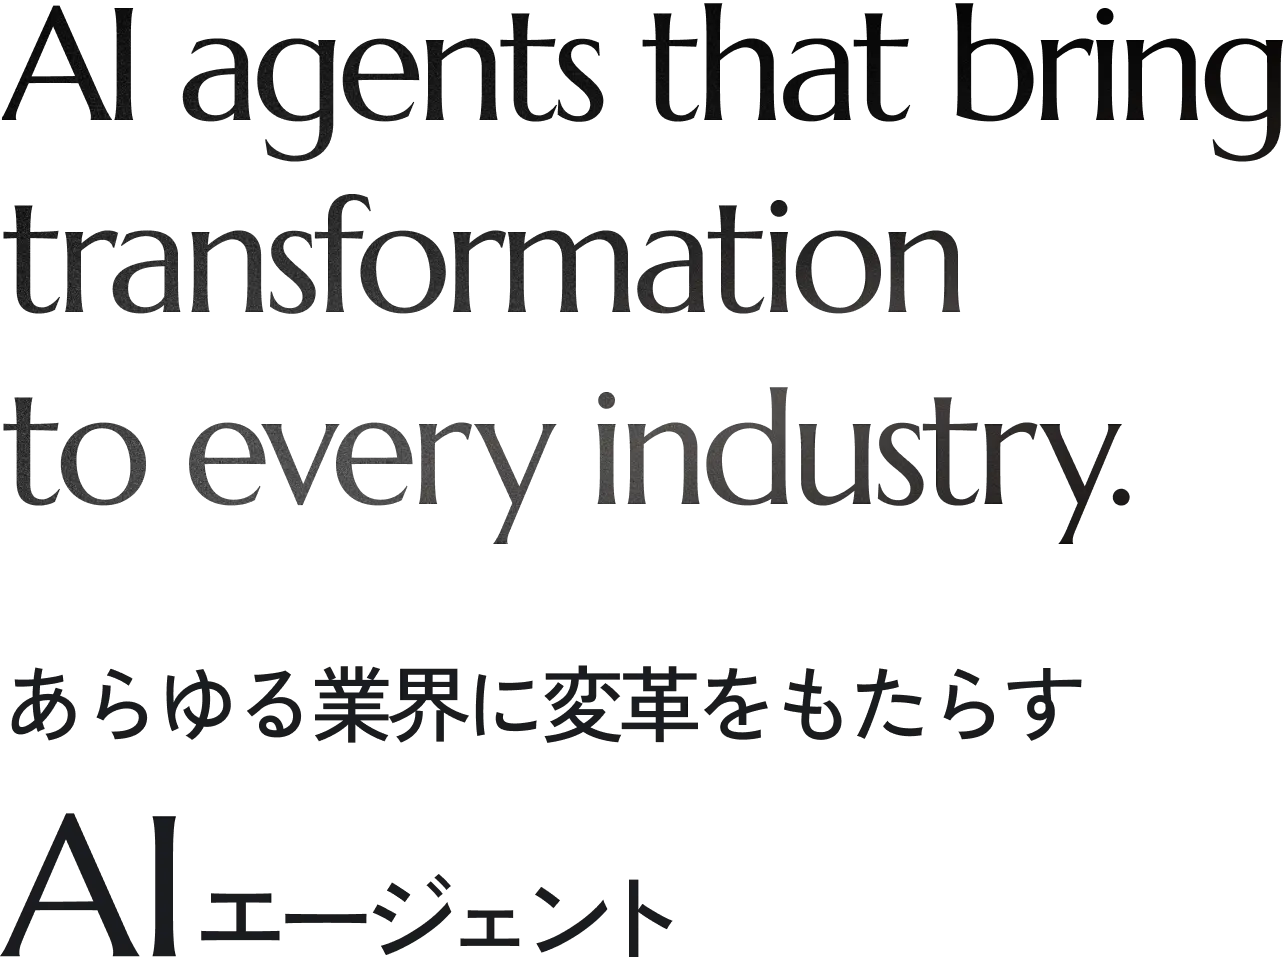 AI agents that bring transformation to every industry. あらゆる業界に変革をもたらす AIエージェント